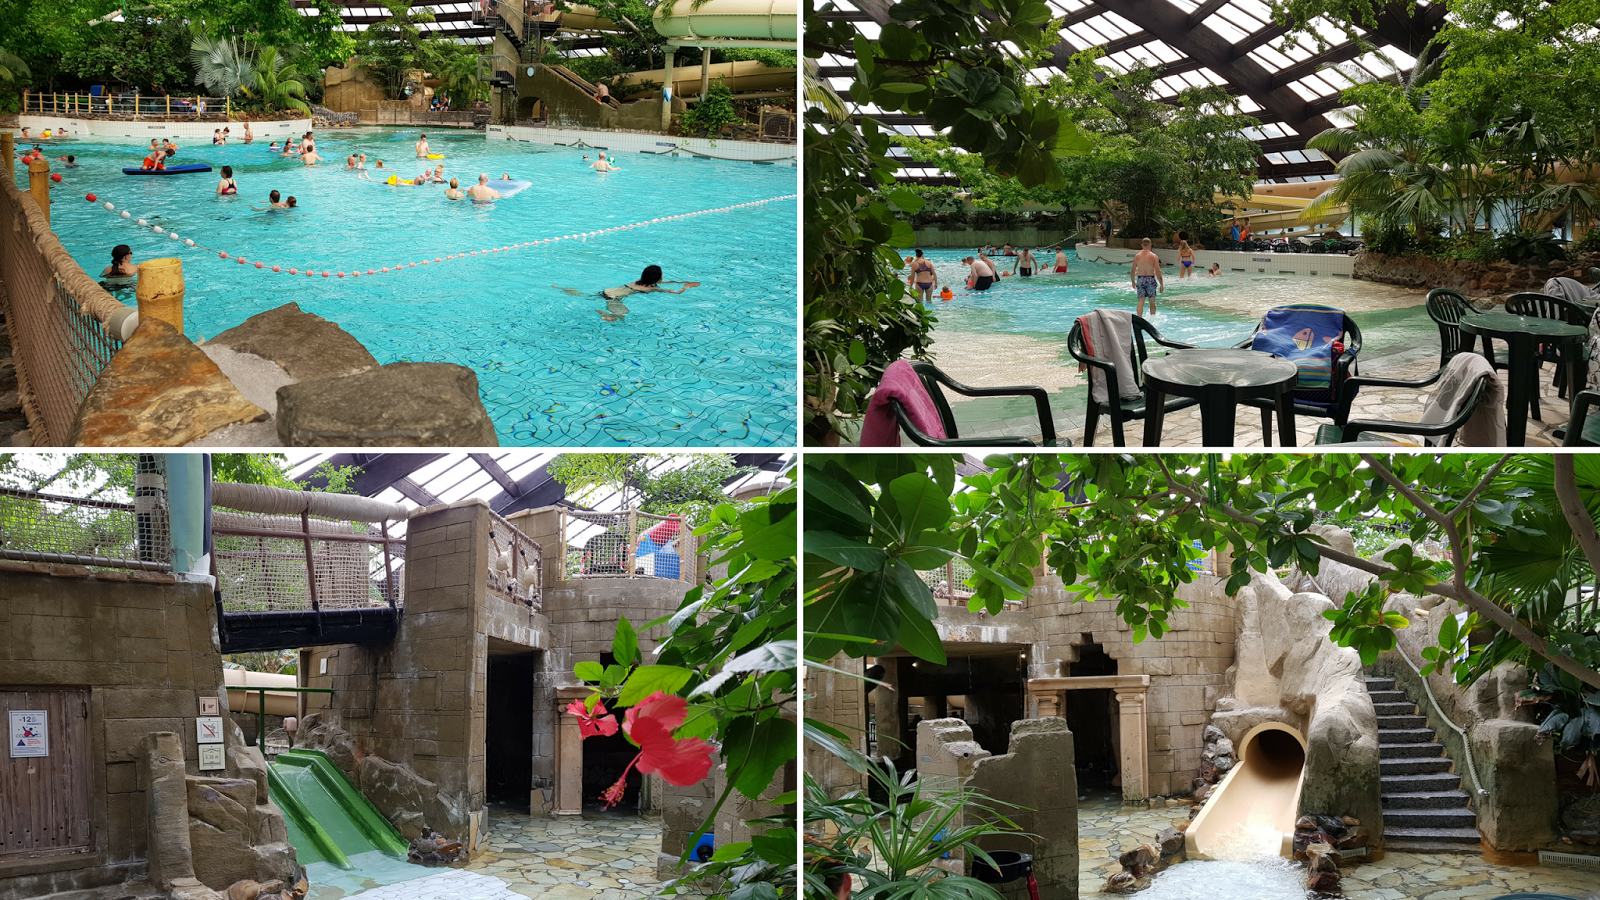 Collage of pictures of the Aqua Mundo at Center Parcs De Kempervennen Clockwise from top left: The main pool with the highest water slide in the background; view from the entrance to the pool area showing the sloping edge to the main pool and a water slide in the background; the toddler area; another view of the toddler area.